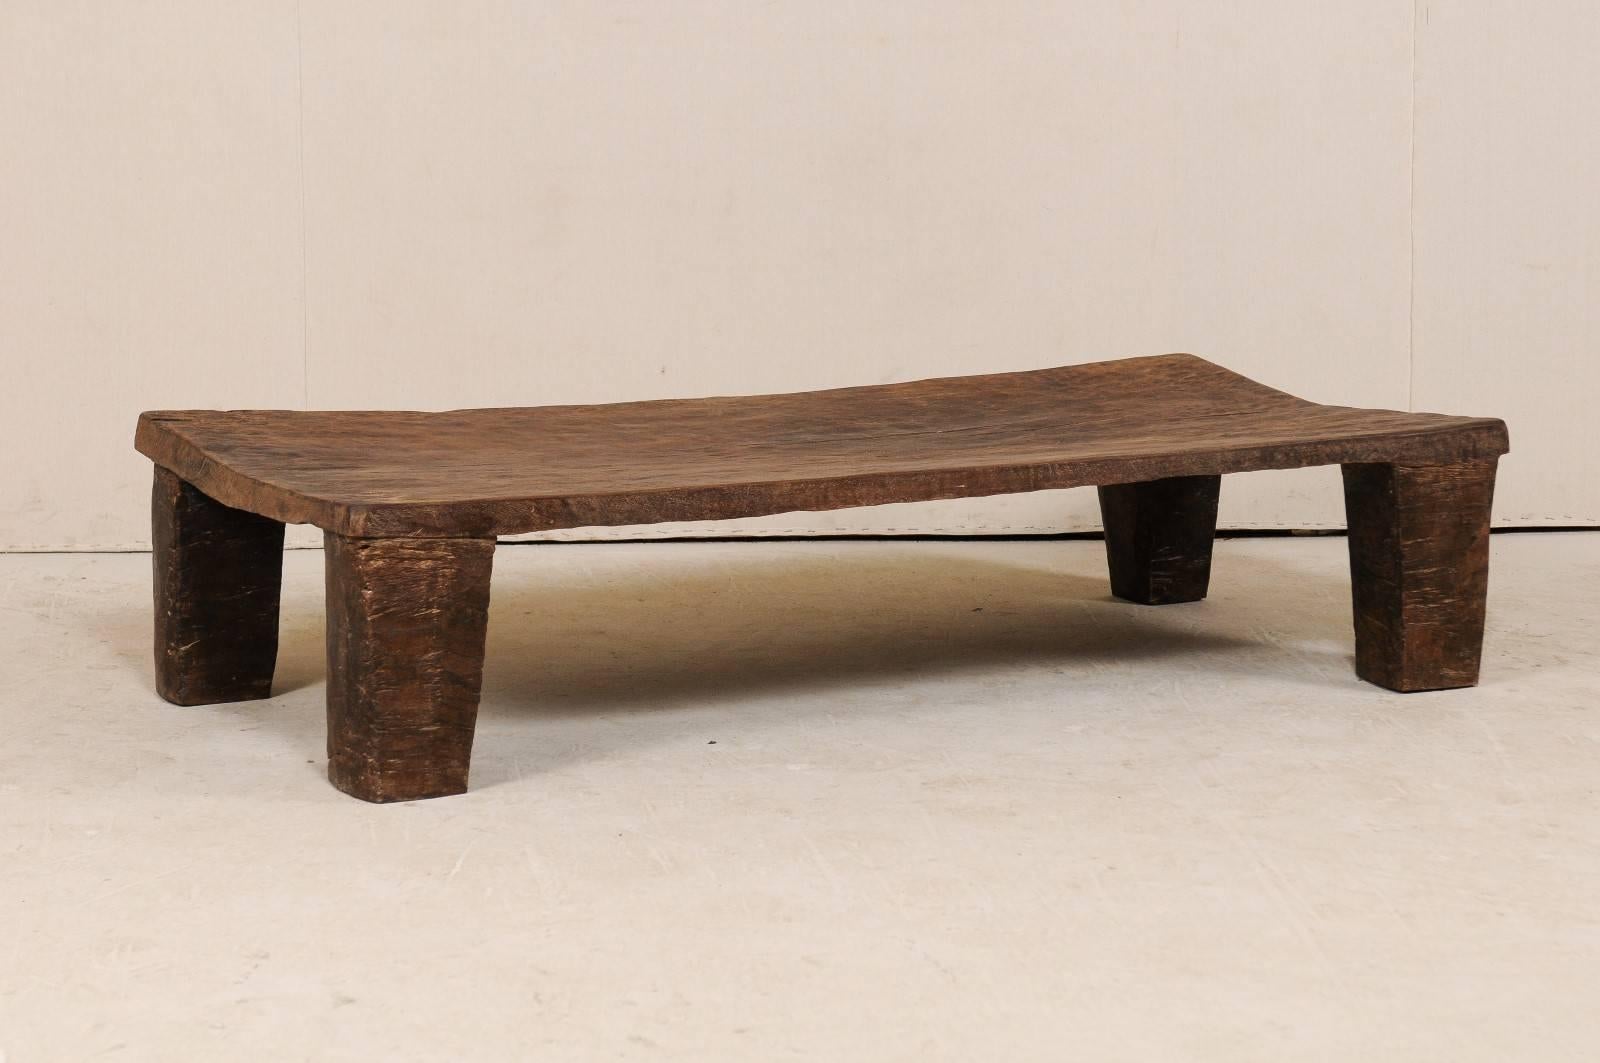 Indian Late 19th Century Nagaland, India Bed Made Rustic Wood Coffee Table